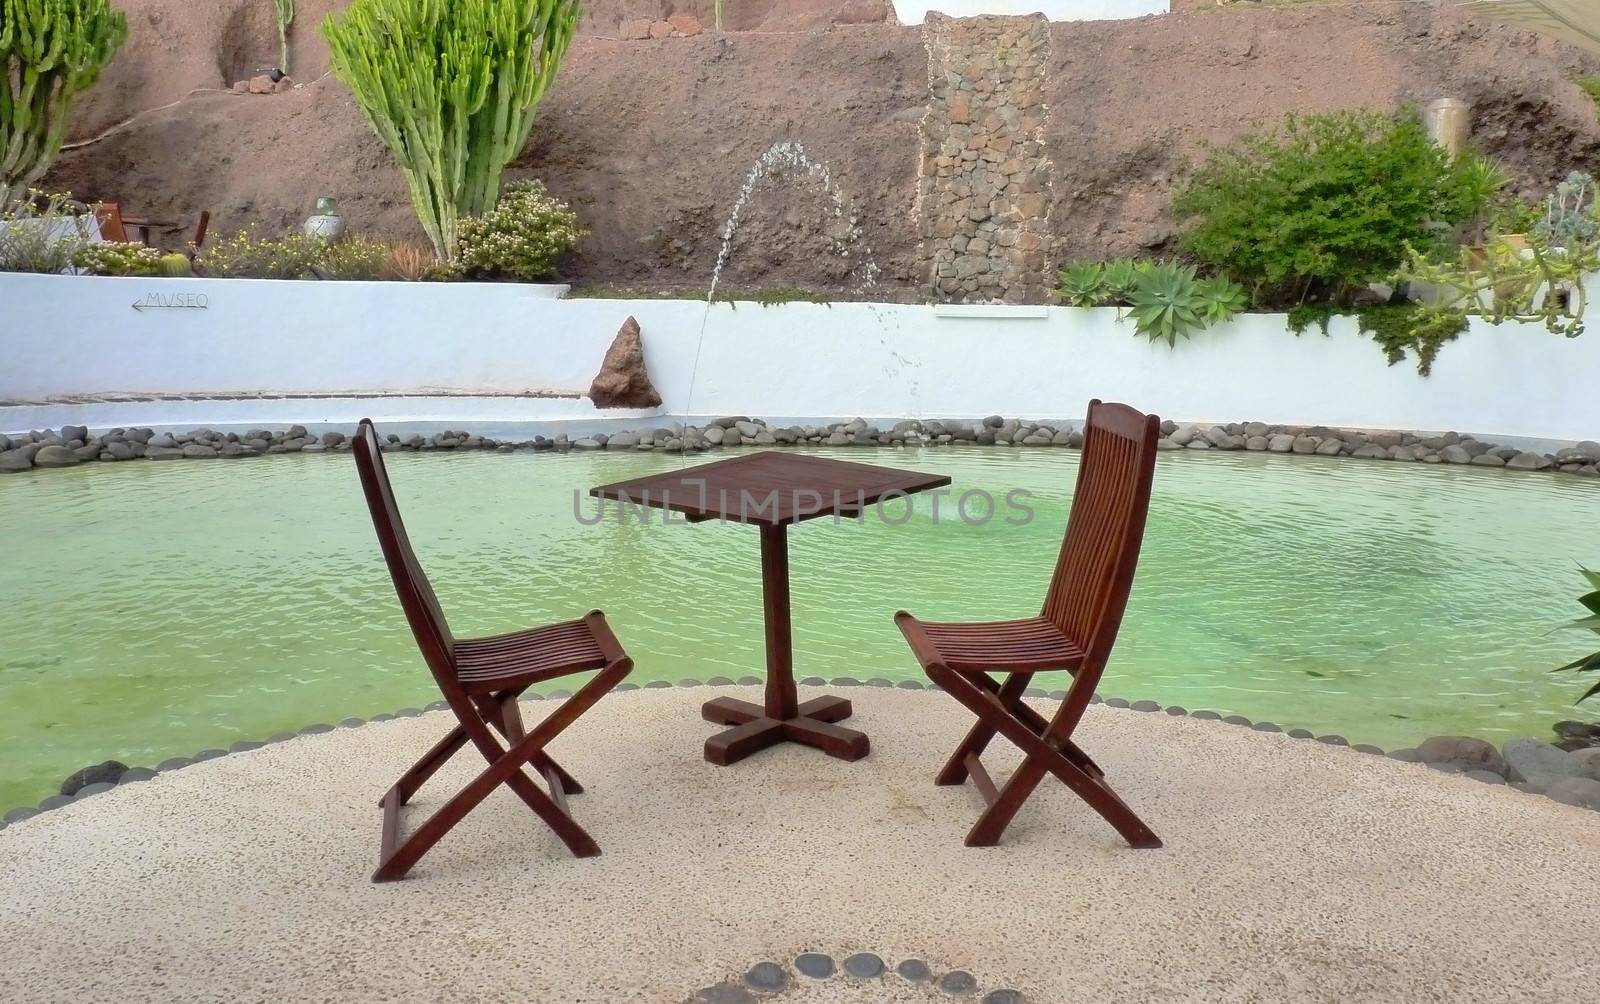 Table and chairs near a pool